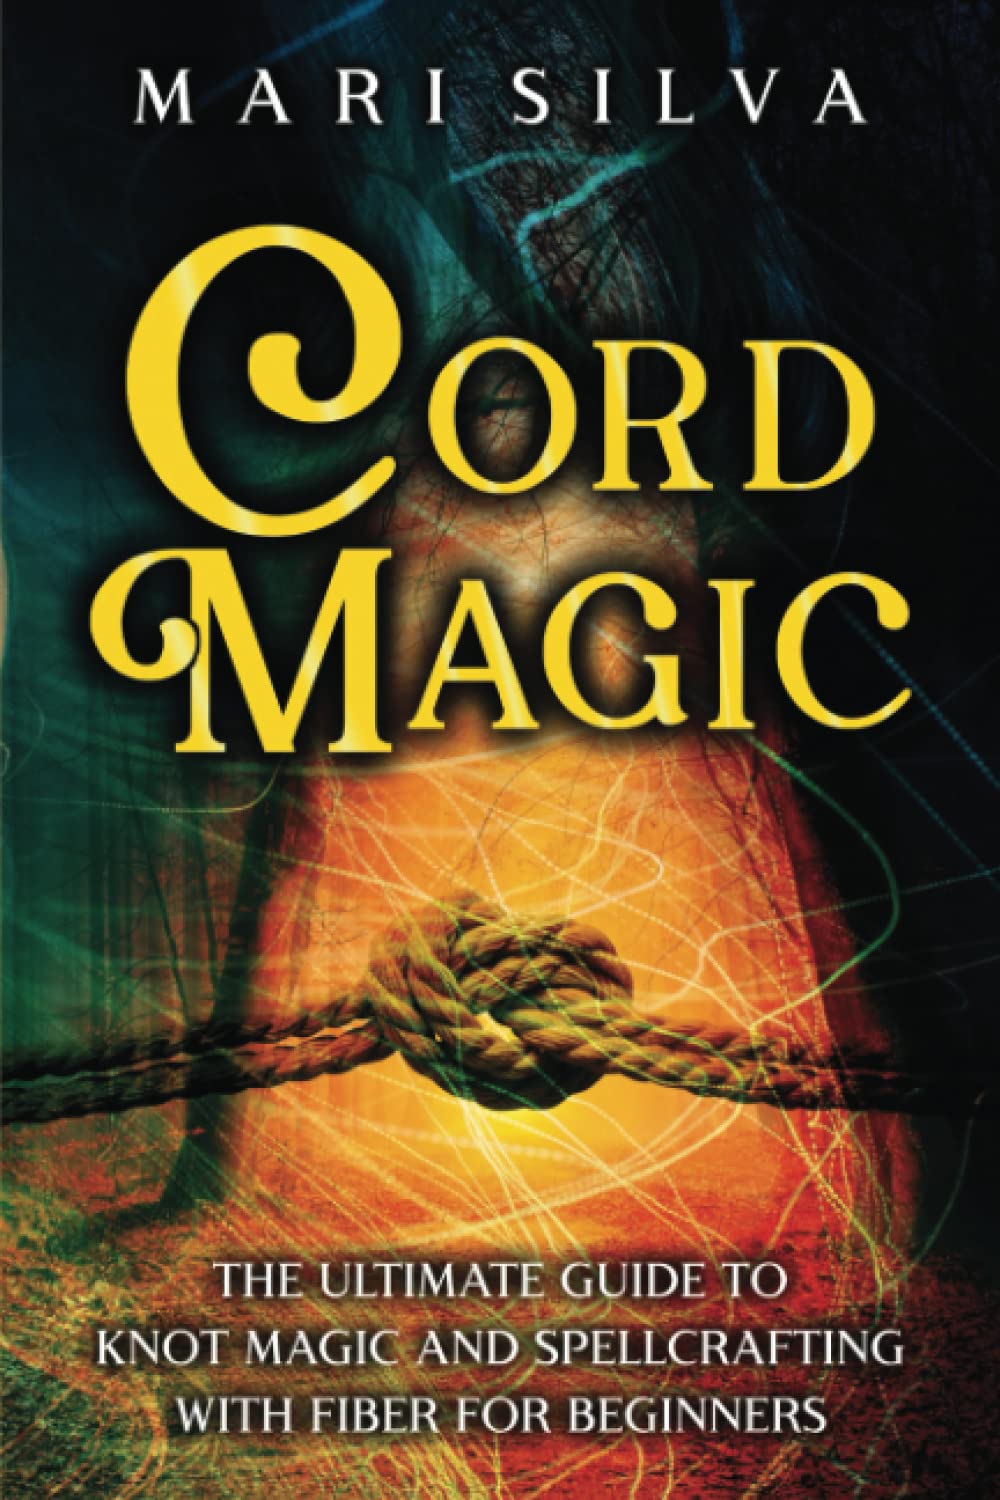 Cord Magic: The Ultimate Guide to Knot Magic and Spellcrafting with Fiber for Beginners